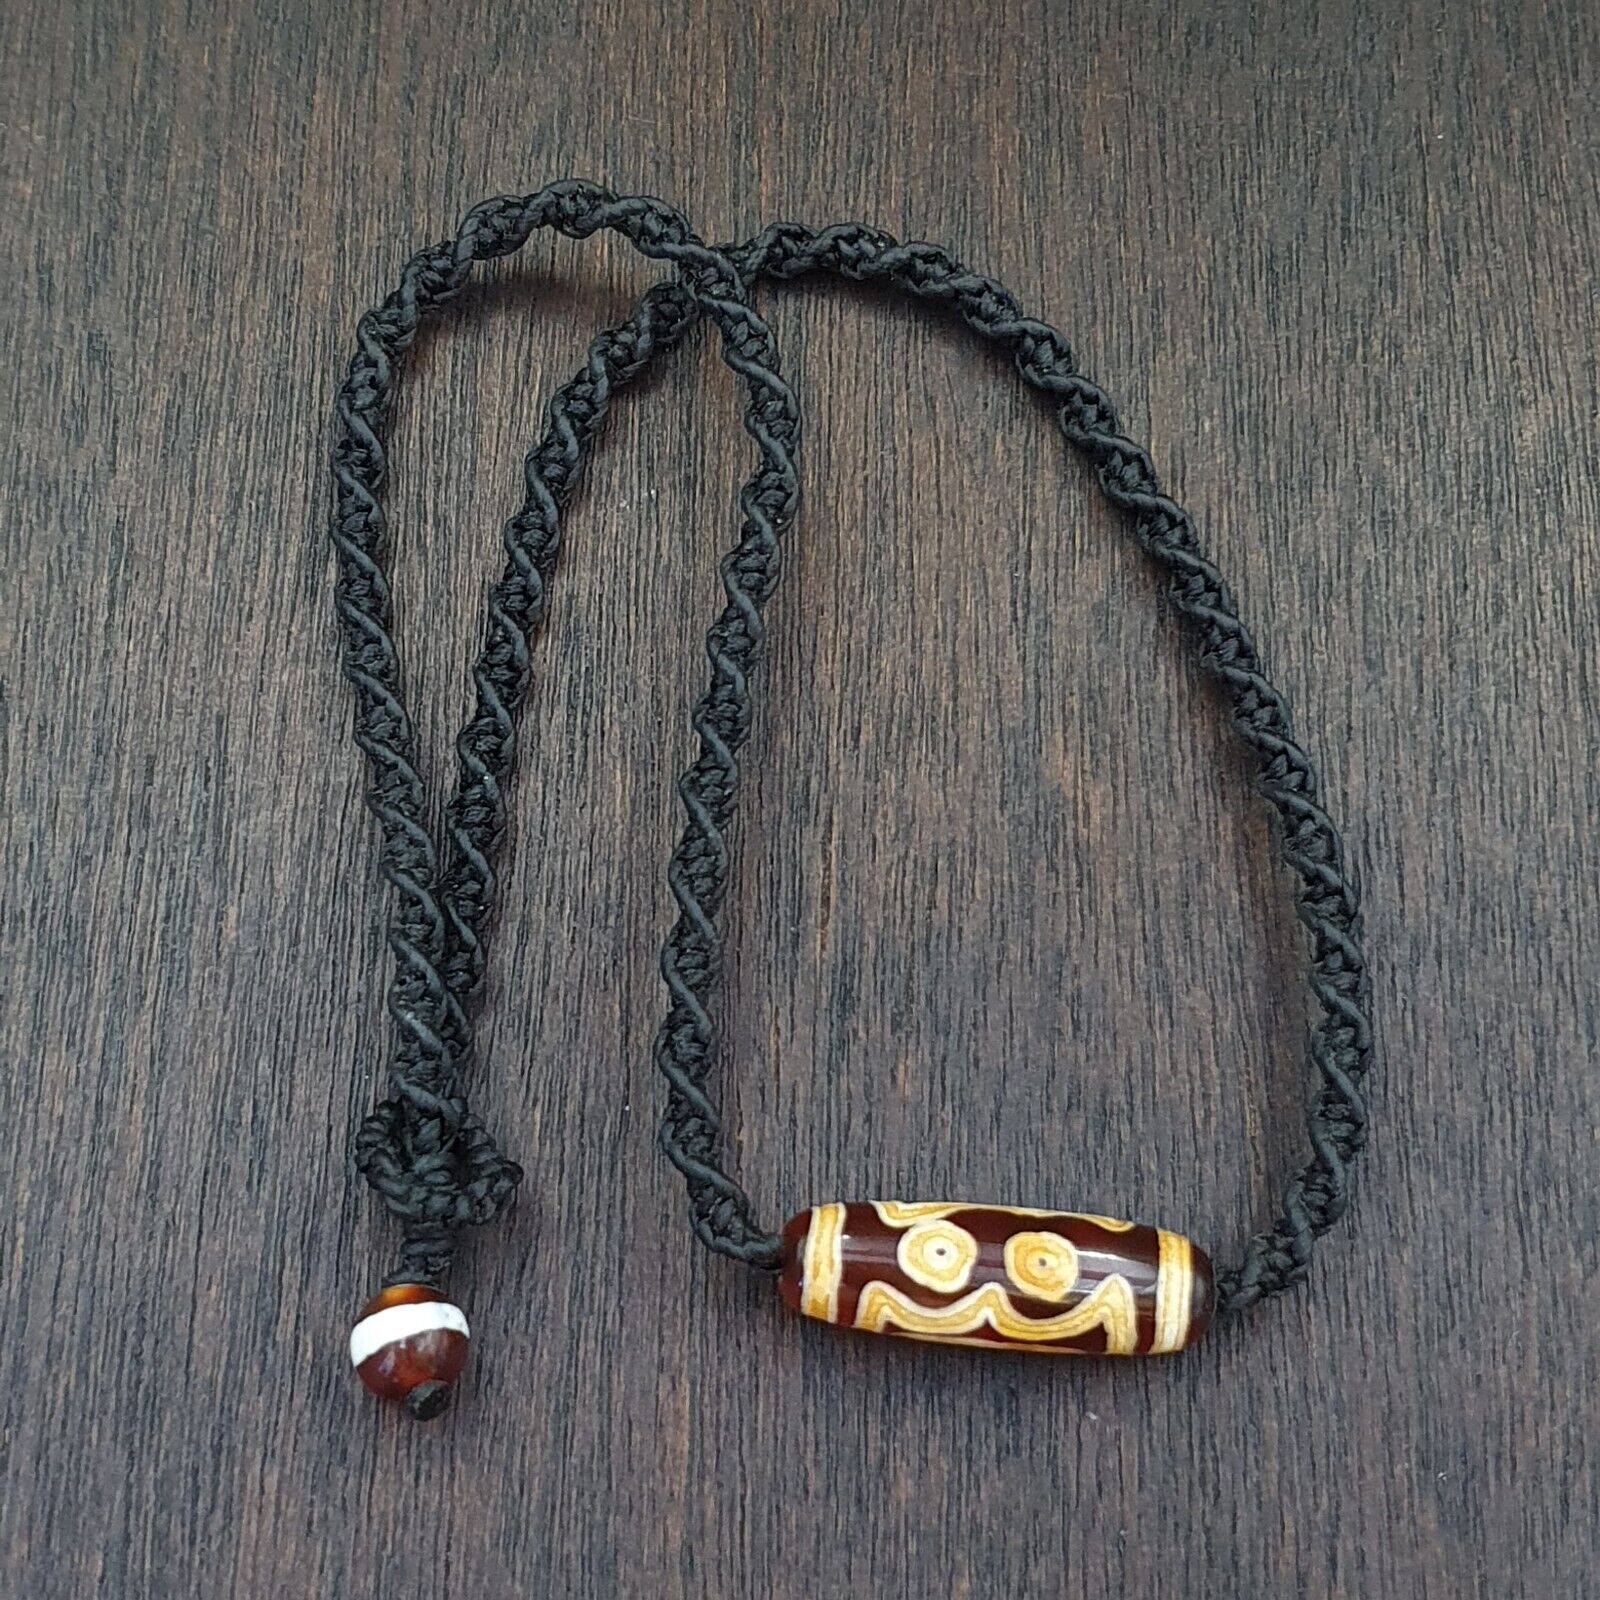 "Image of a vintage Taiwanese red agate pendant necklace featuring an etched 3-eyed bead, an ancient amulet believed to possess spiritual powers, showcasing a rare and precious cultural artifact from a bygone era."